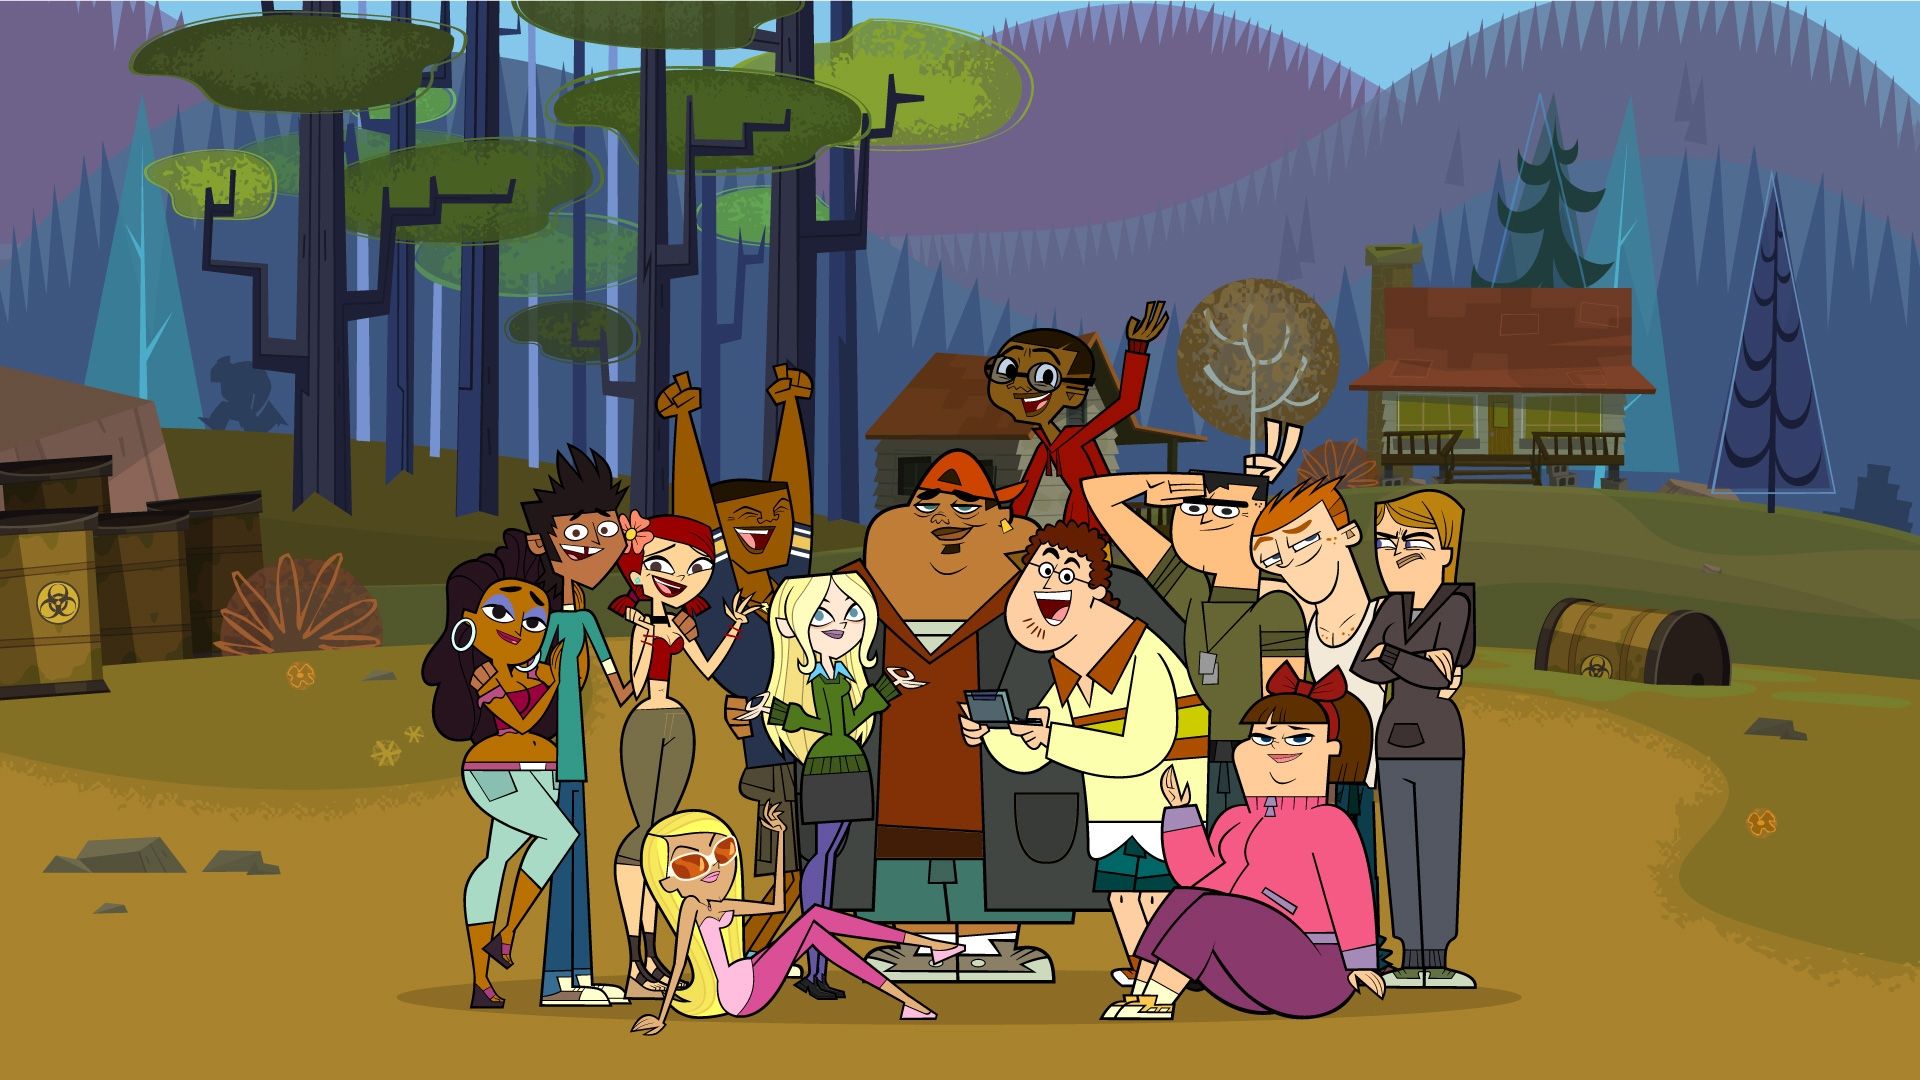 Total Drama Wallpapers posted by Ethan Peltier.